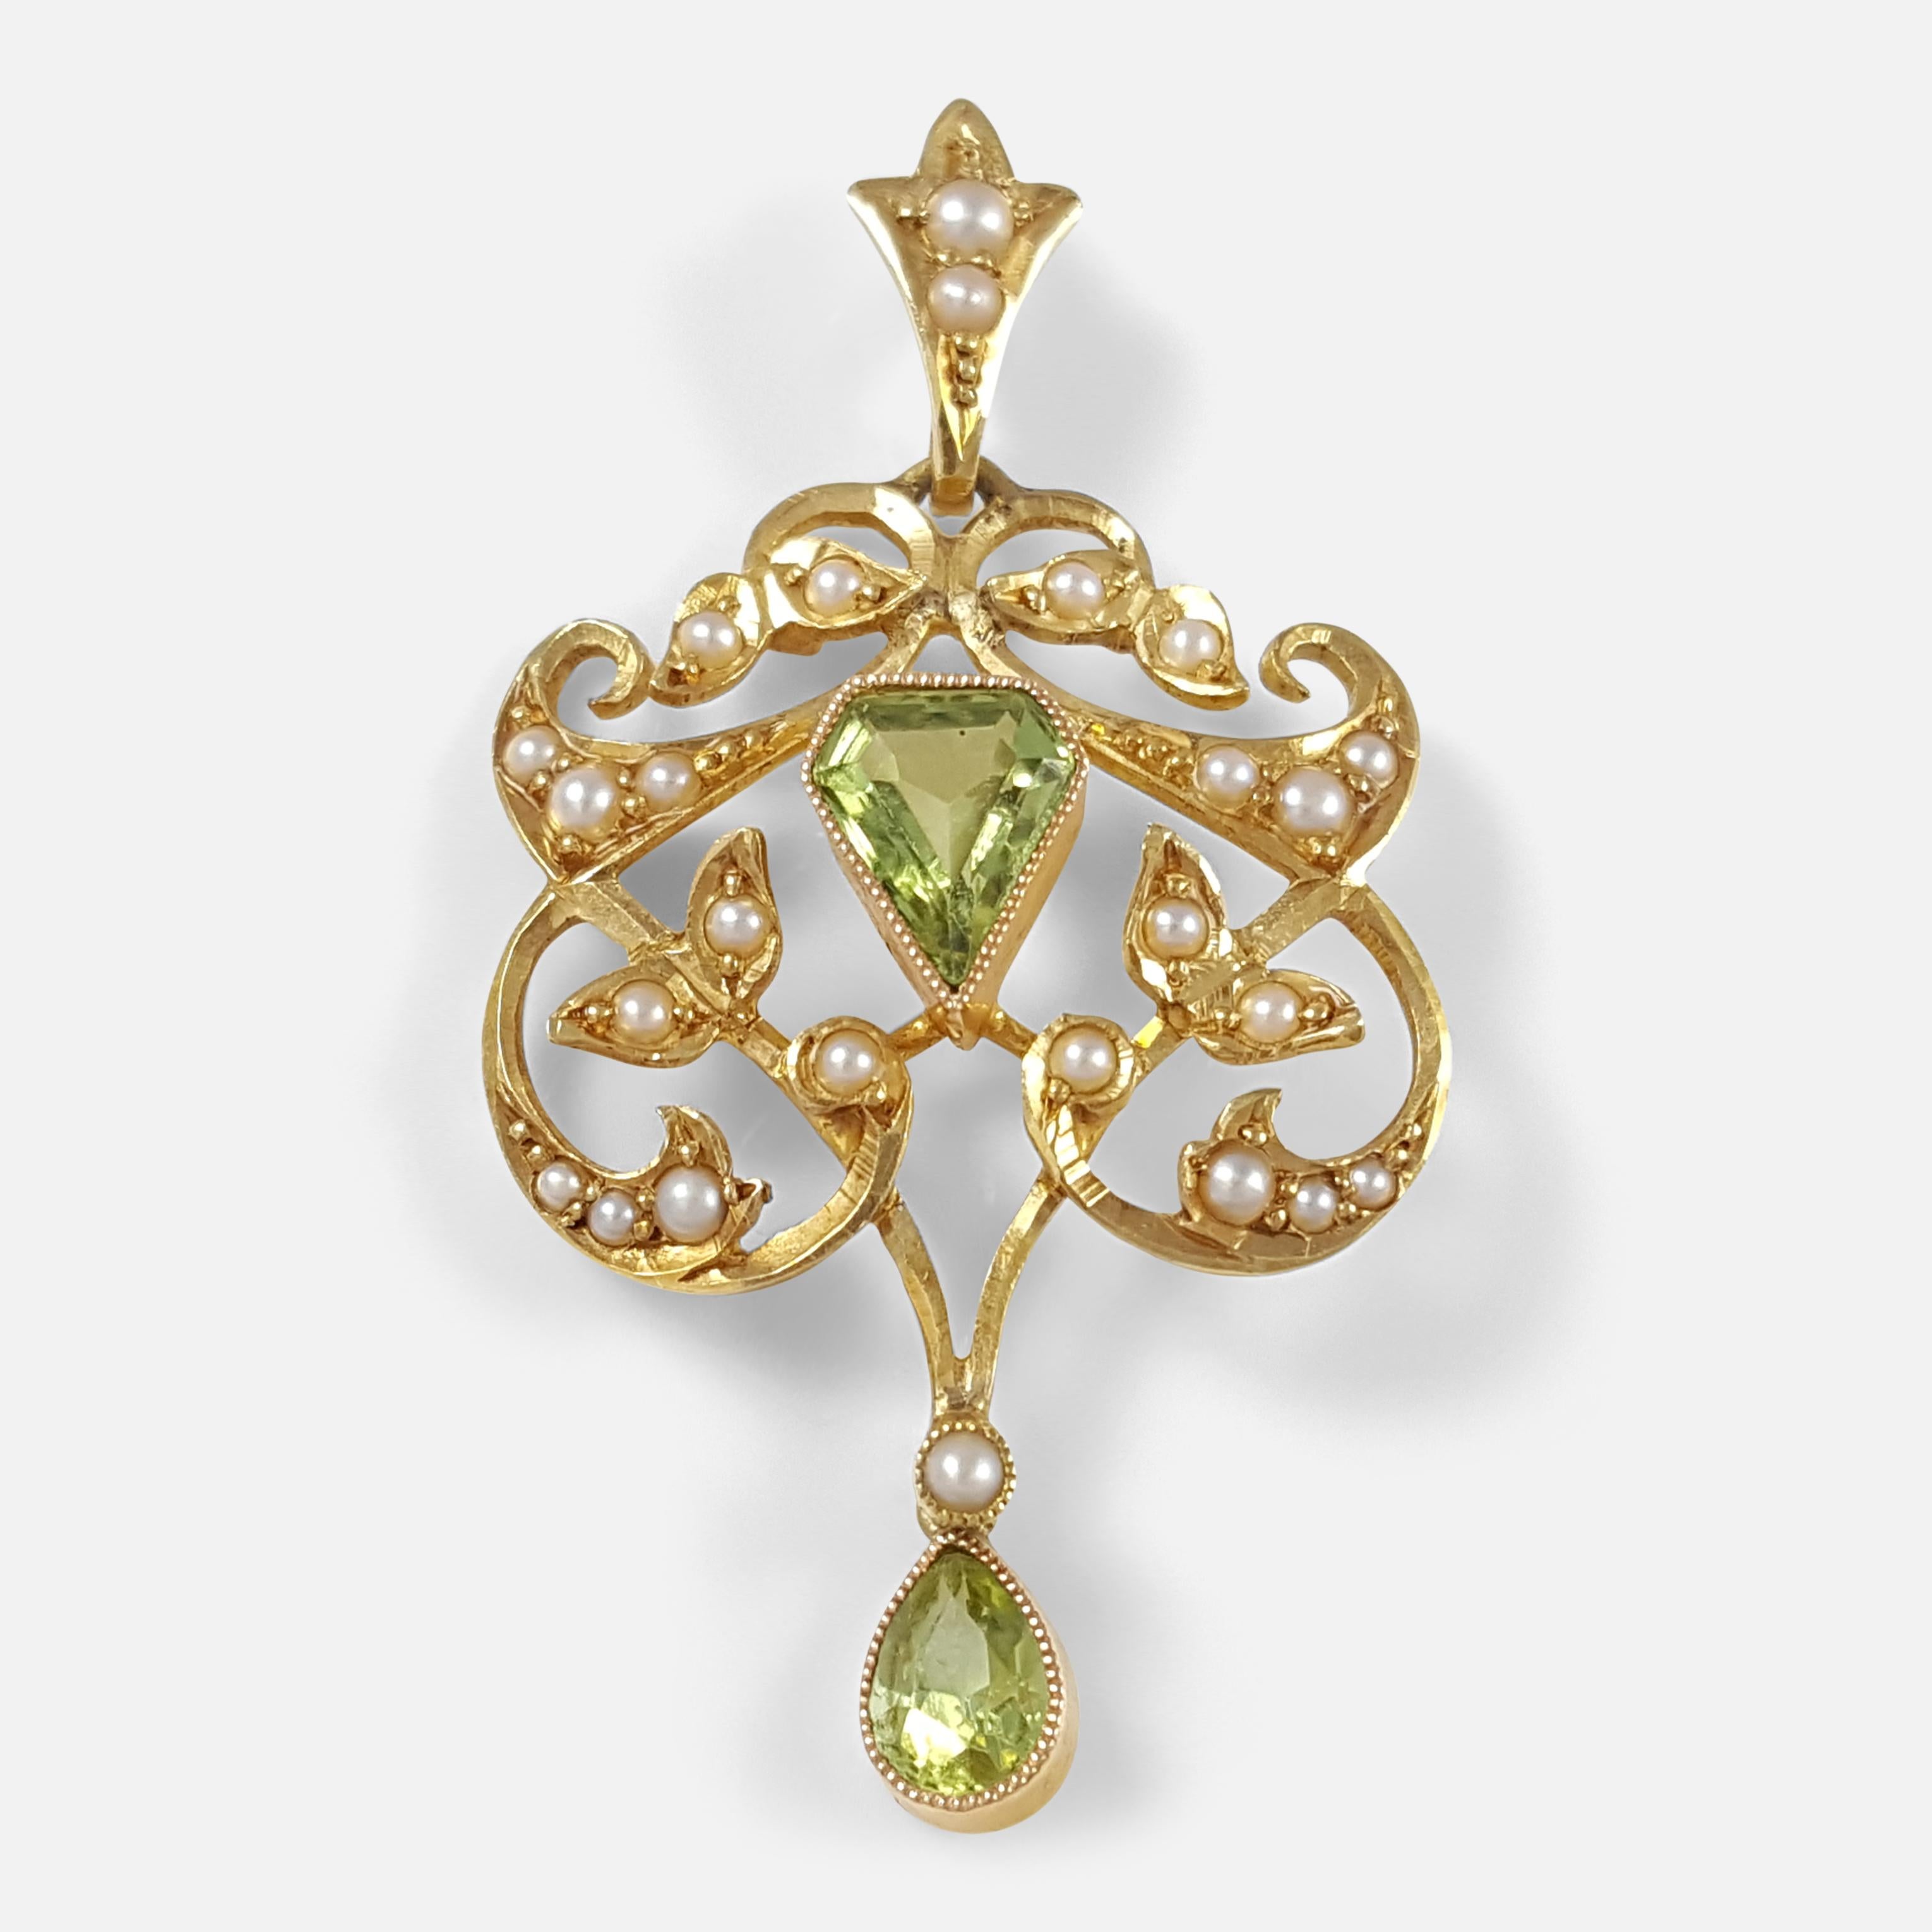 Description: - This is a fine antique Edwardian period 15 karat yellow gold peridot & seed pearl pendant. As was common for the period, the pendant is stamped '15ct' to denote 15 karat (carat) gold fineness. 

Date: - c1905.

Measurement: - The